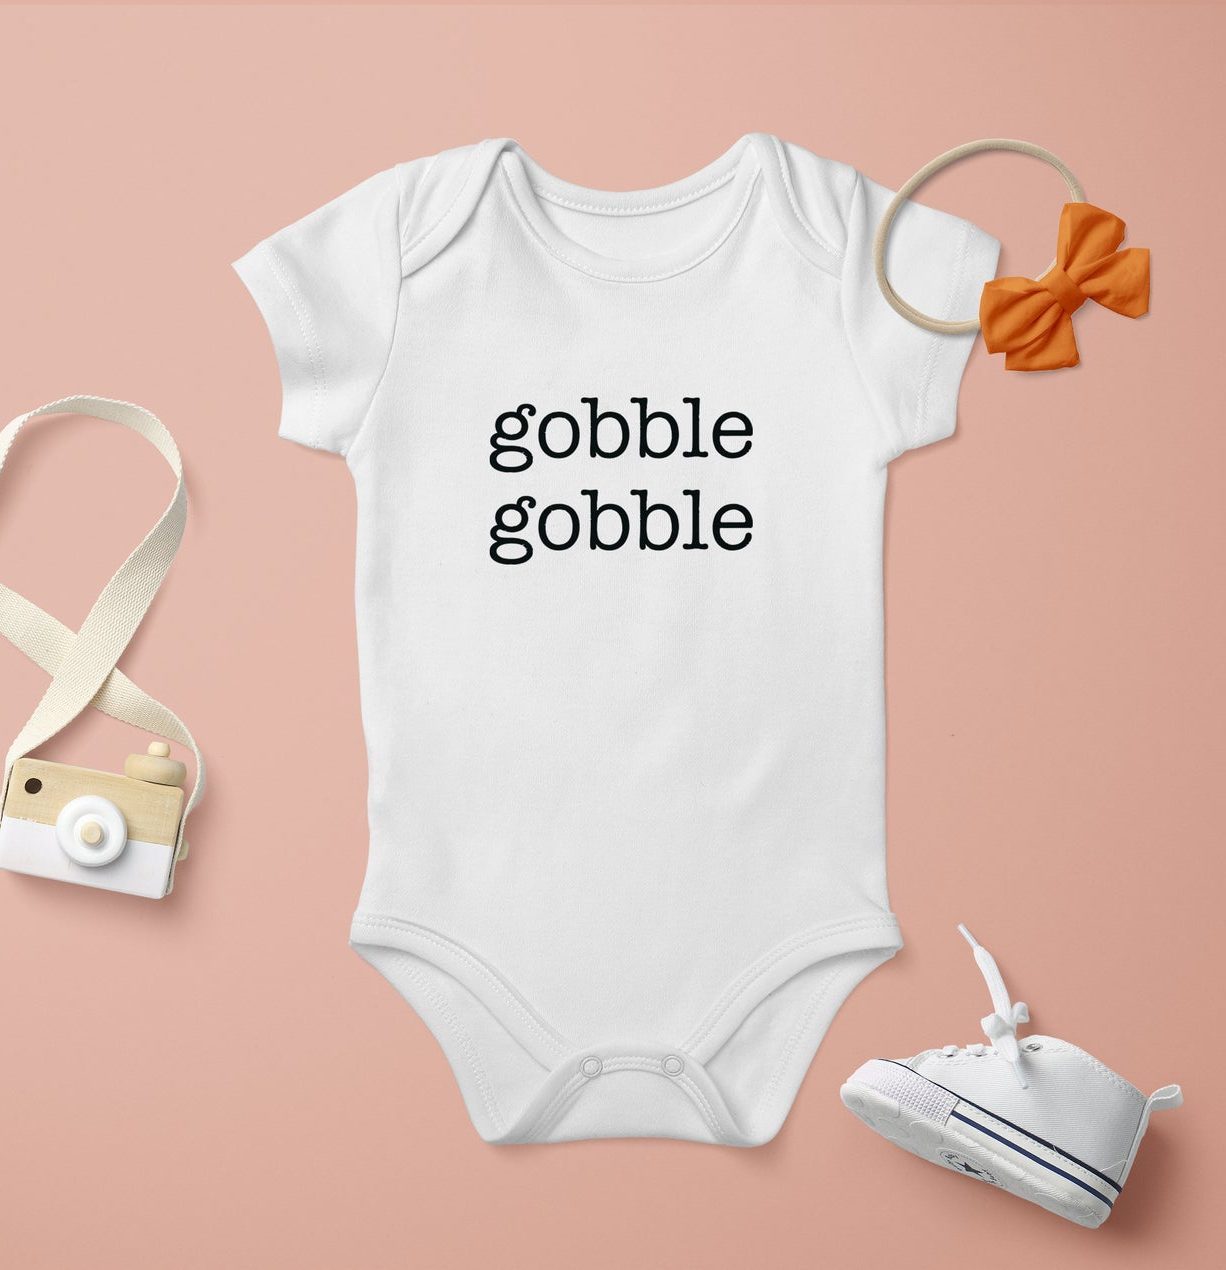 10 Adorable Baby's First Thanksgiving Outfits